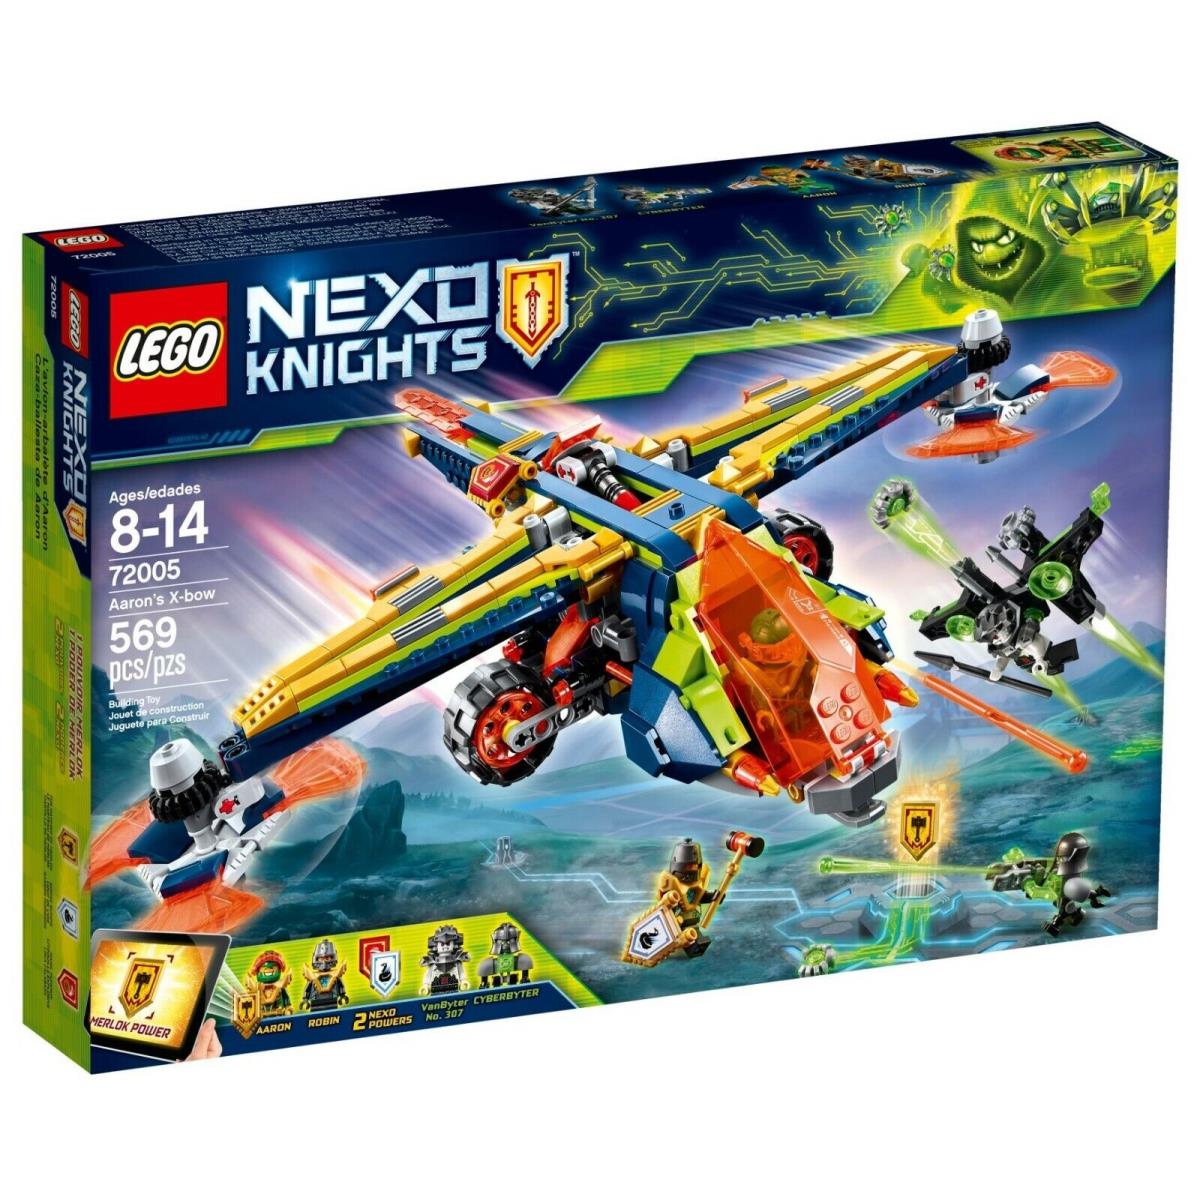 Lego 72005 Aarons X-bow Plane Nexo Knights Retired Mint